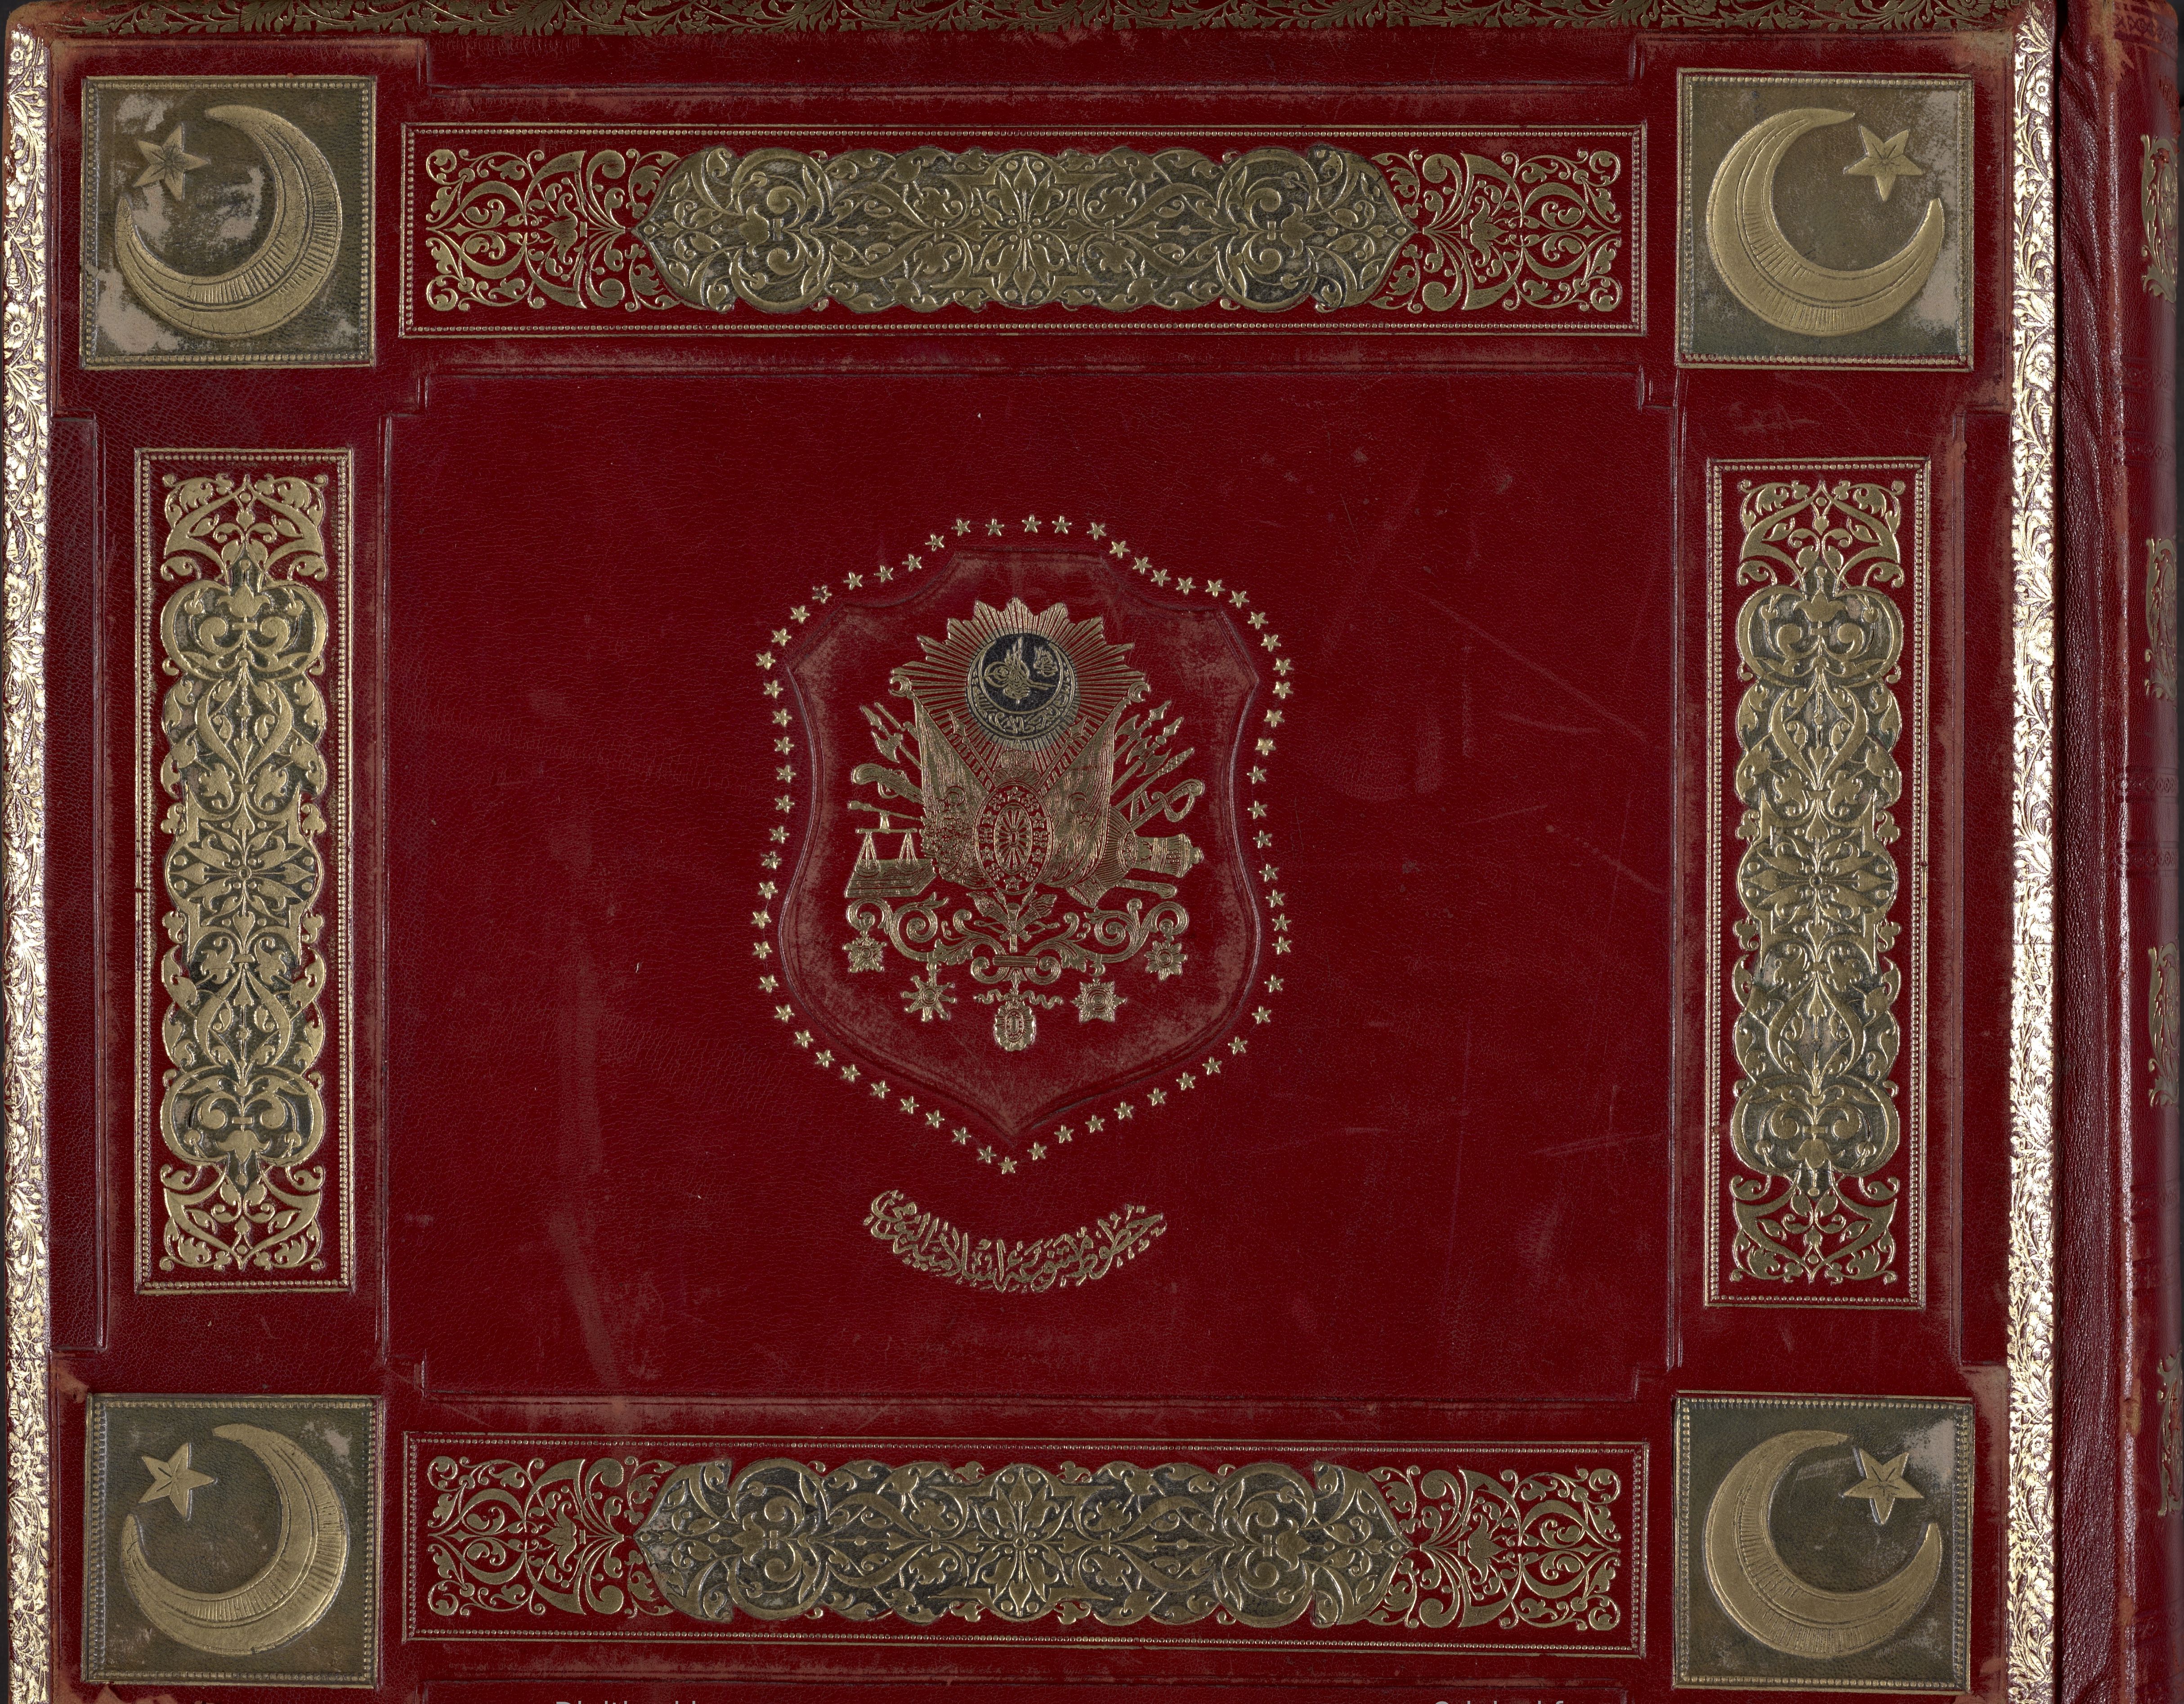 red leather book cover with golden Ottoman imperial insignia, title, border, and corner decorations